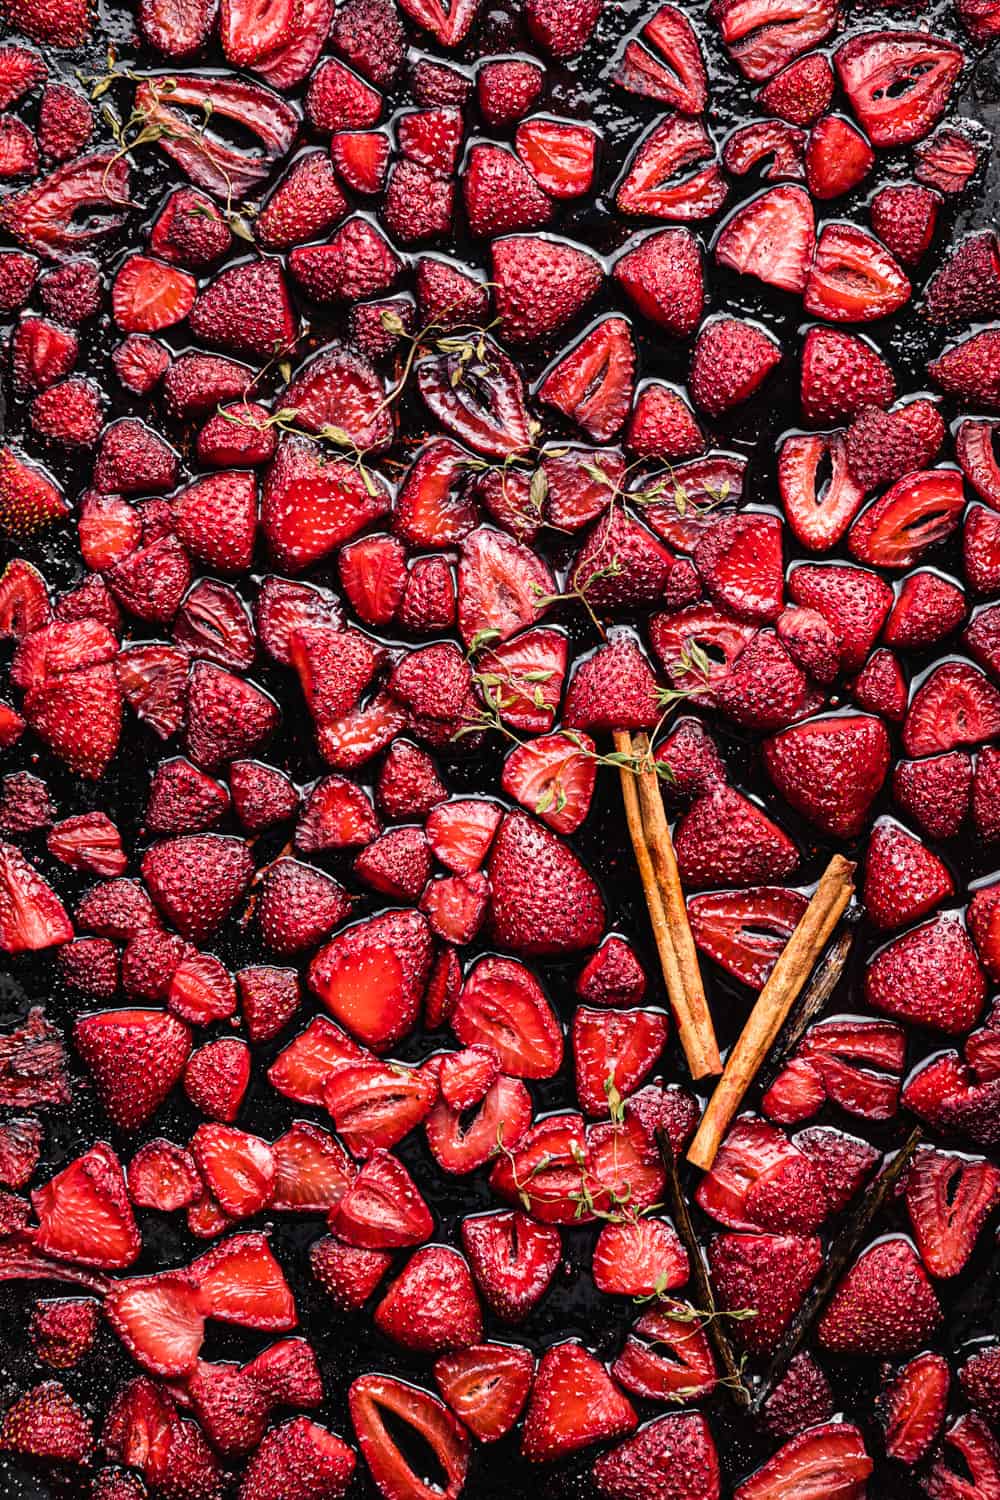 roasted strawberries with cinnamon sticks, vanilla beans and thyme on a baking sheet.